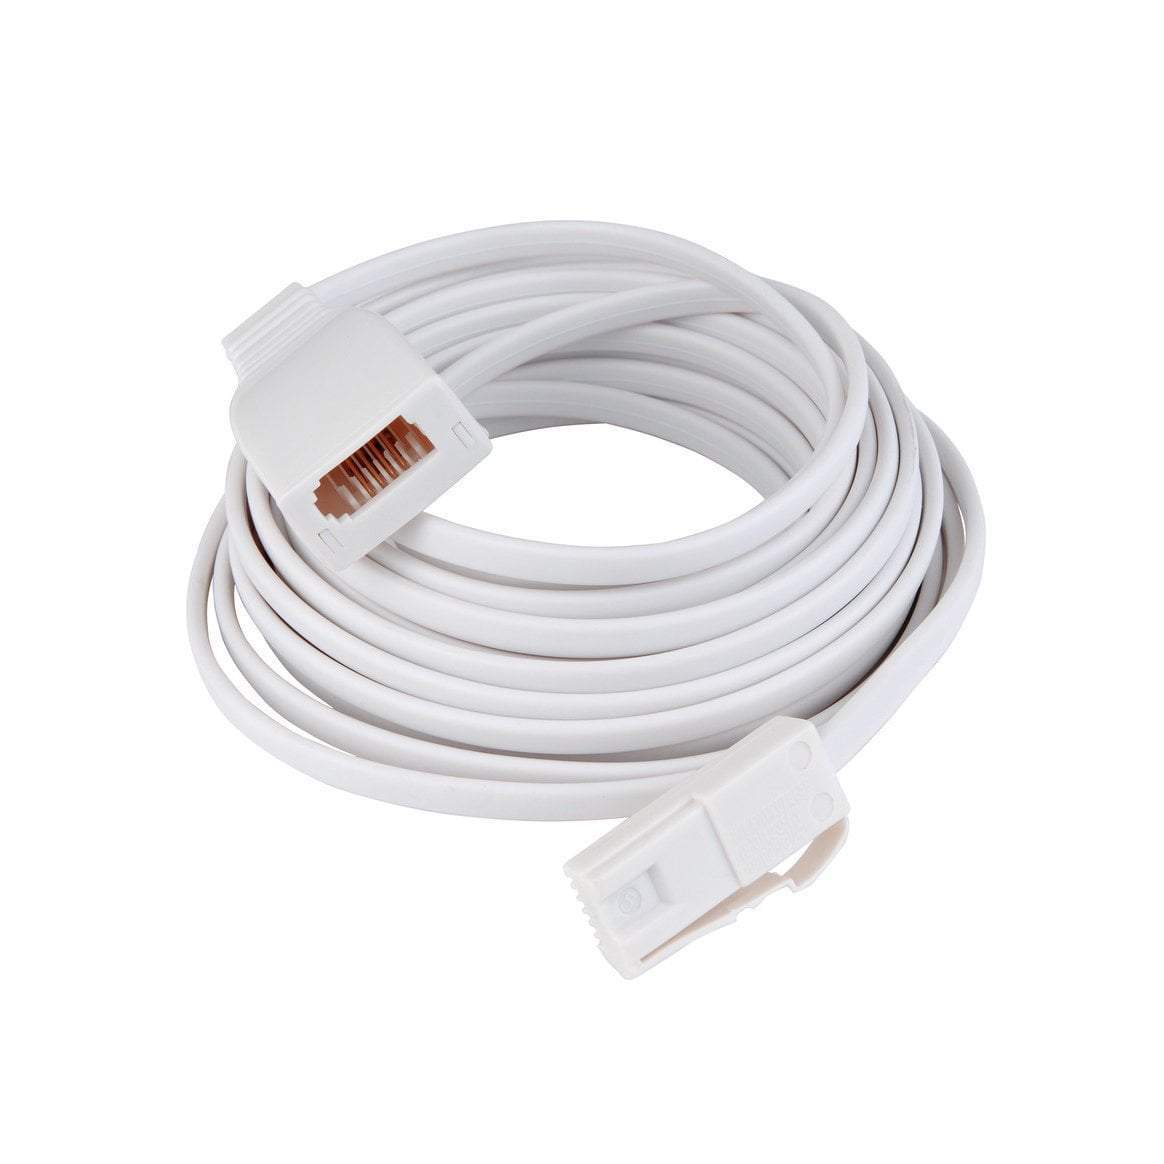 Home Office Telephone Extension Lead 10 Metre 1019 (Parcel Rate)